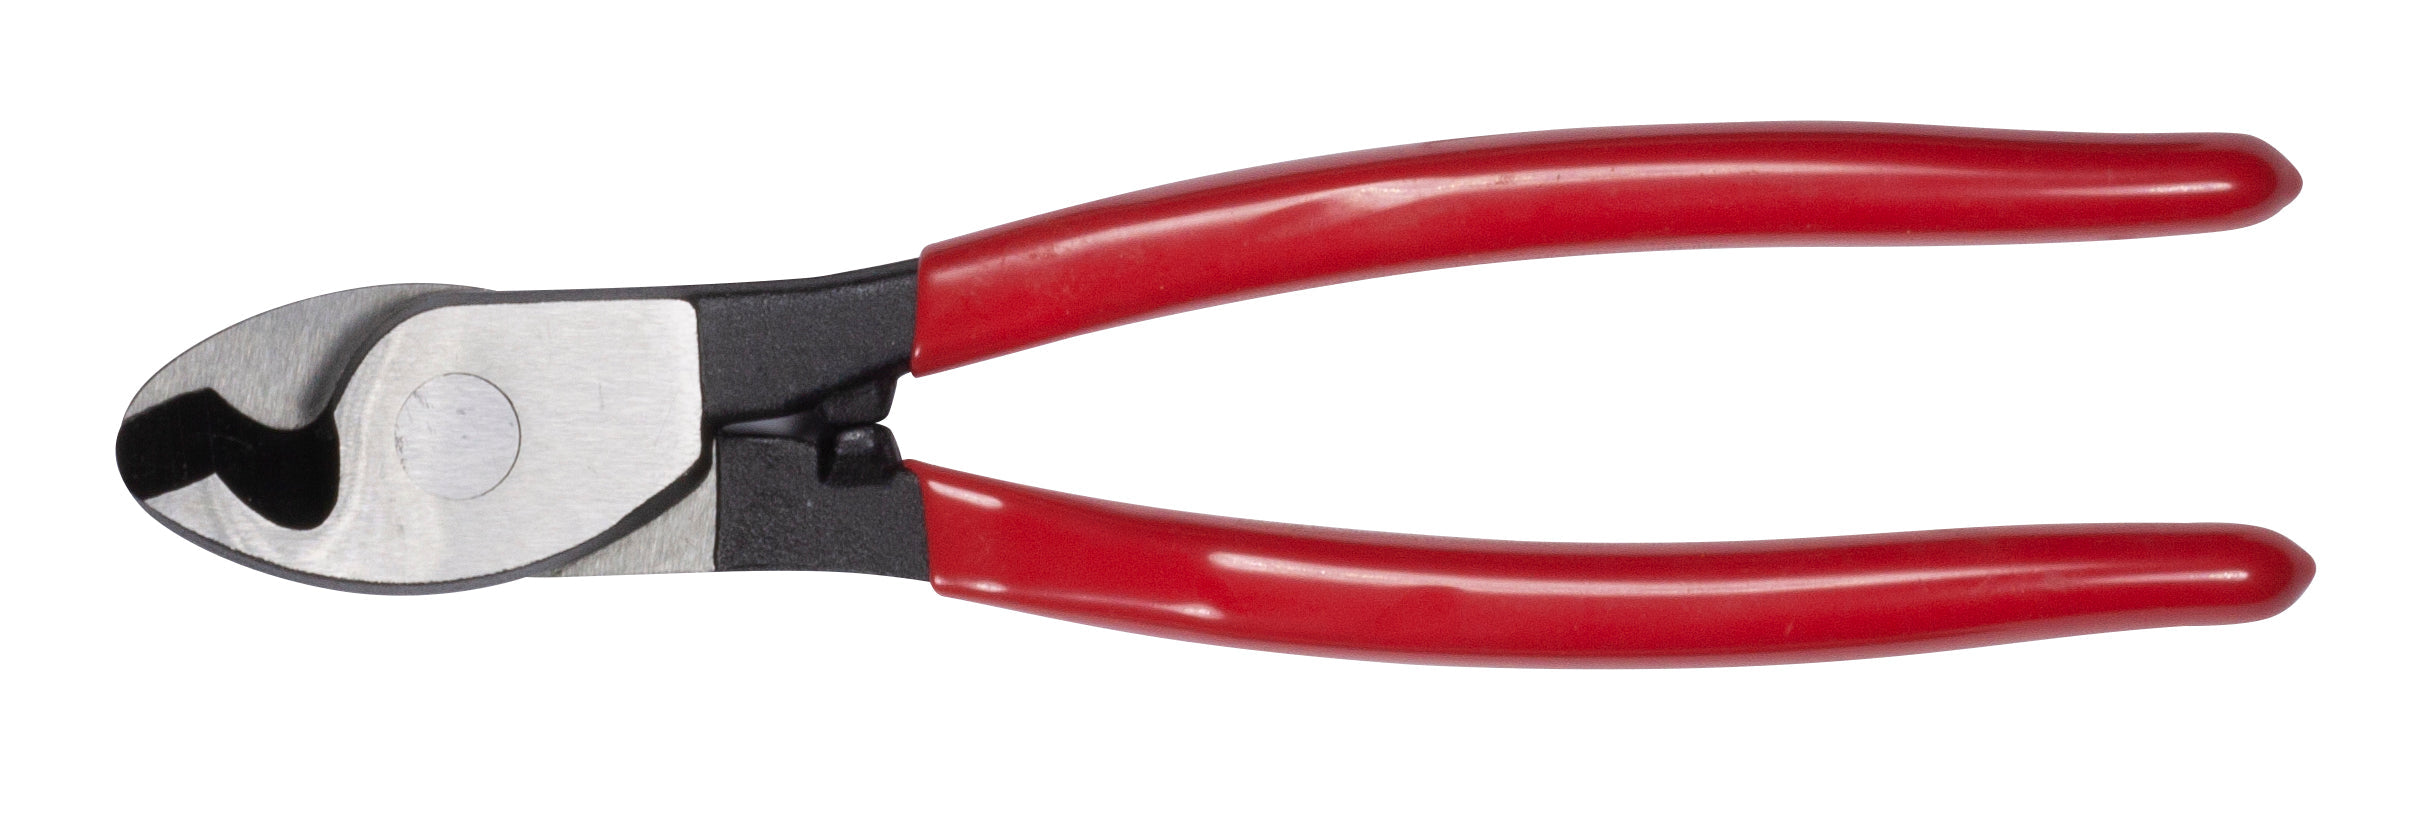 Cable Cutter Size: 38mm² - Per Pack